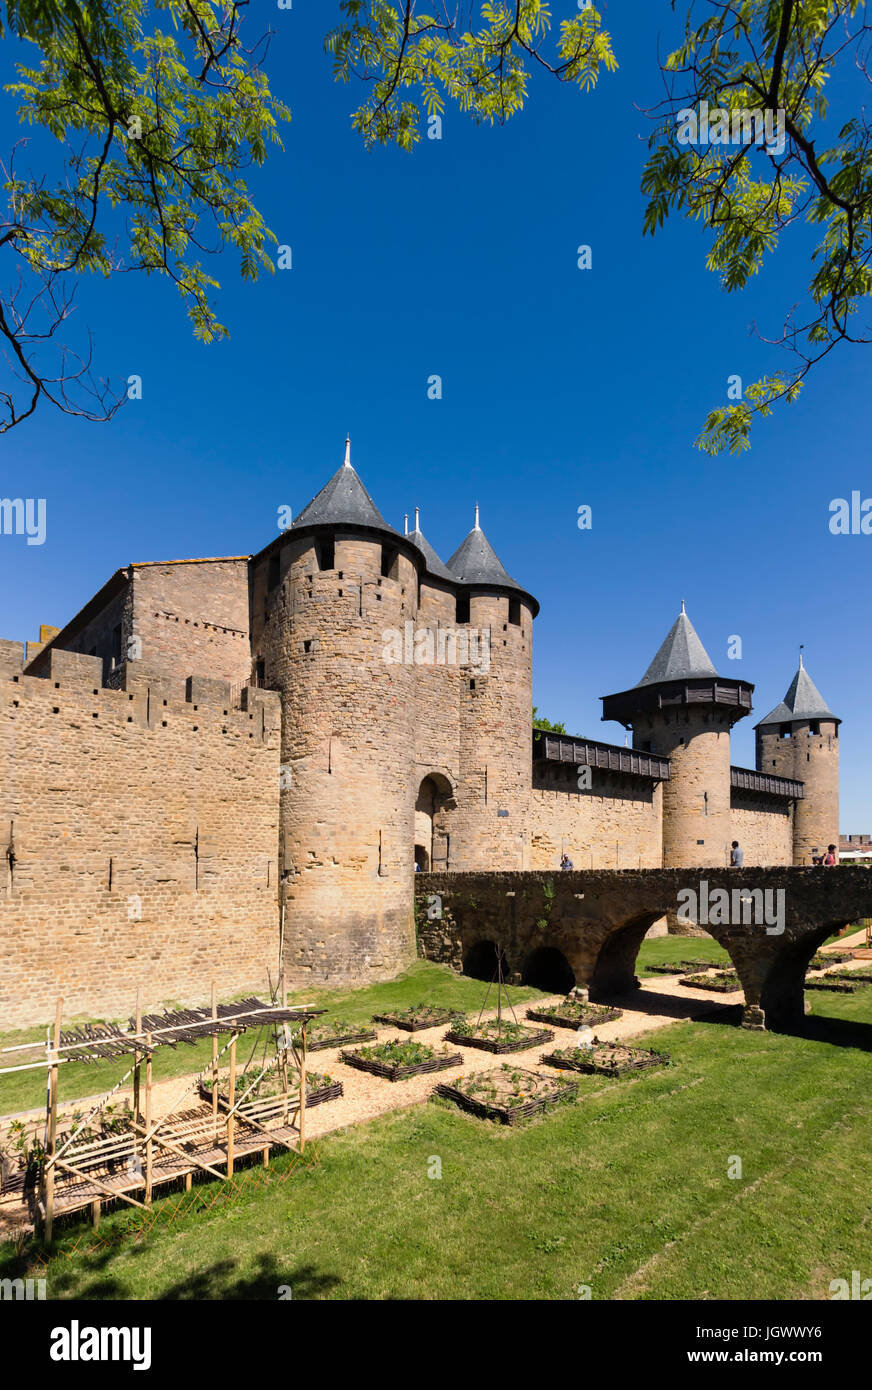 Carcassonne, Languedoc-Roussillon, France. Le Chateau; a fortress within the walls of the fortified city. The Cite de Carcassonne is a UNESCO World He Stock Photo